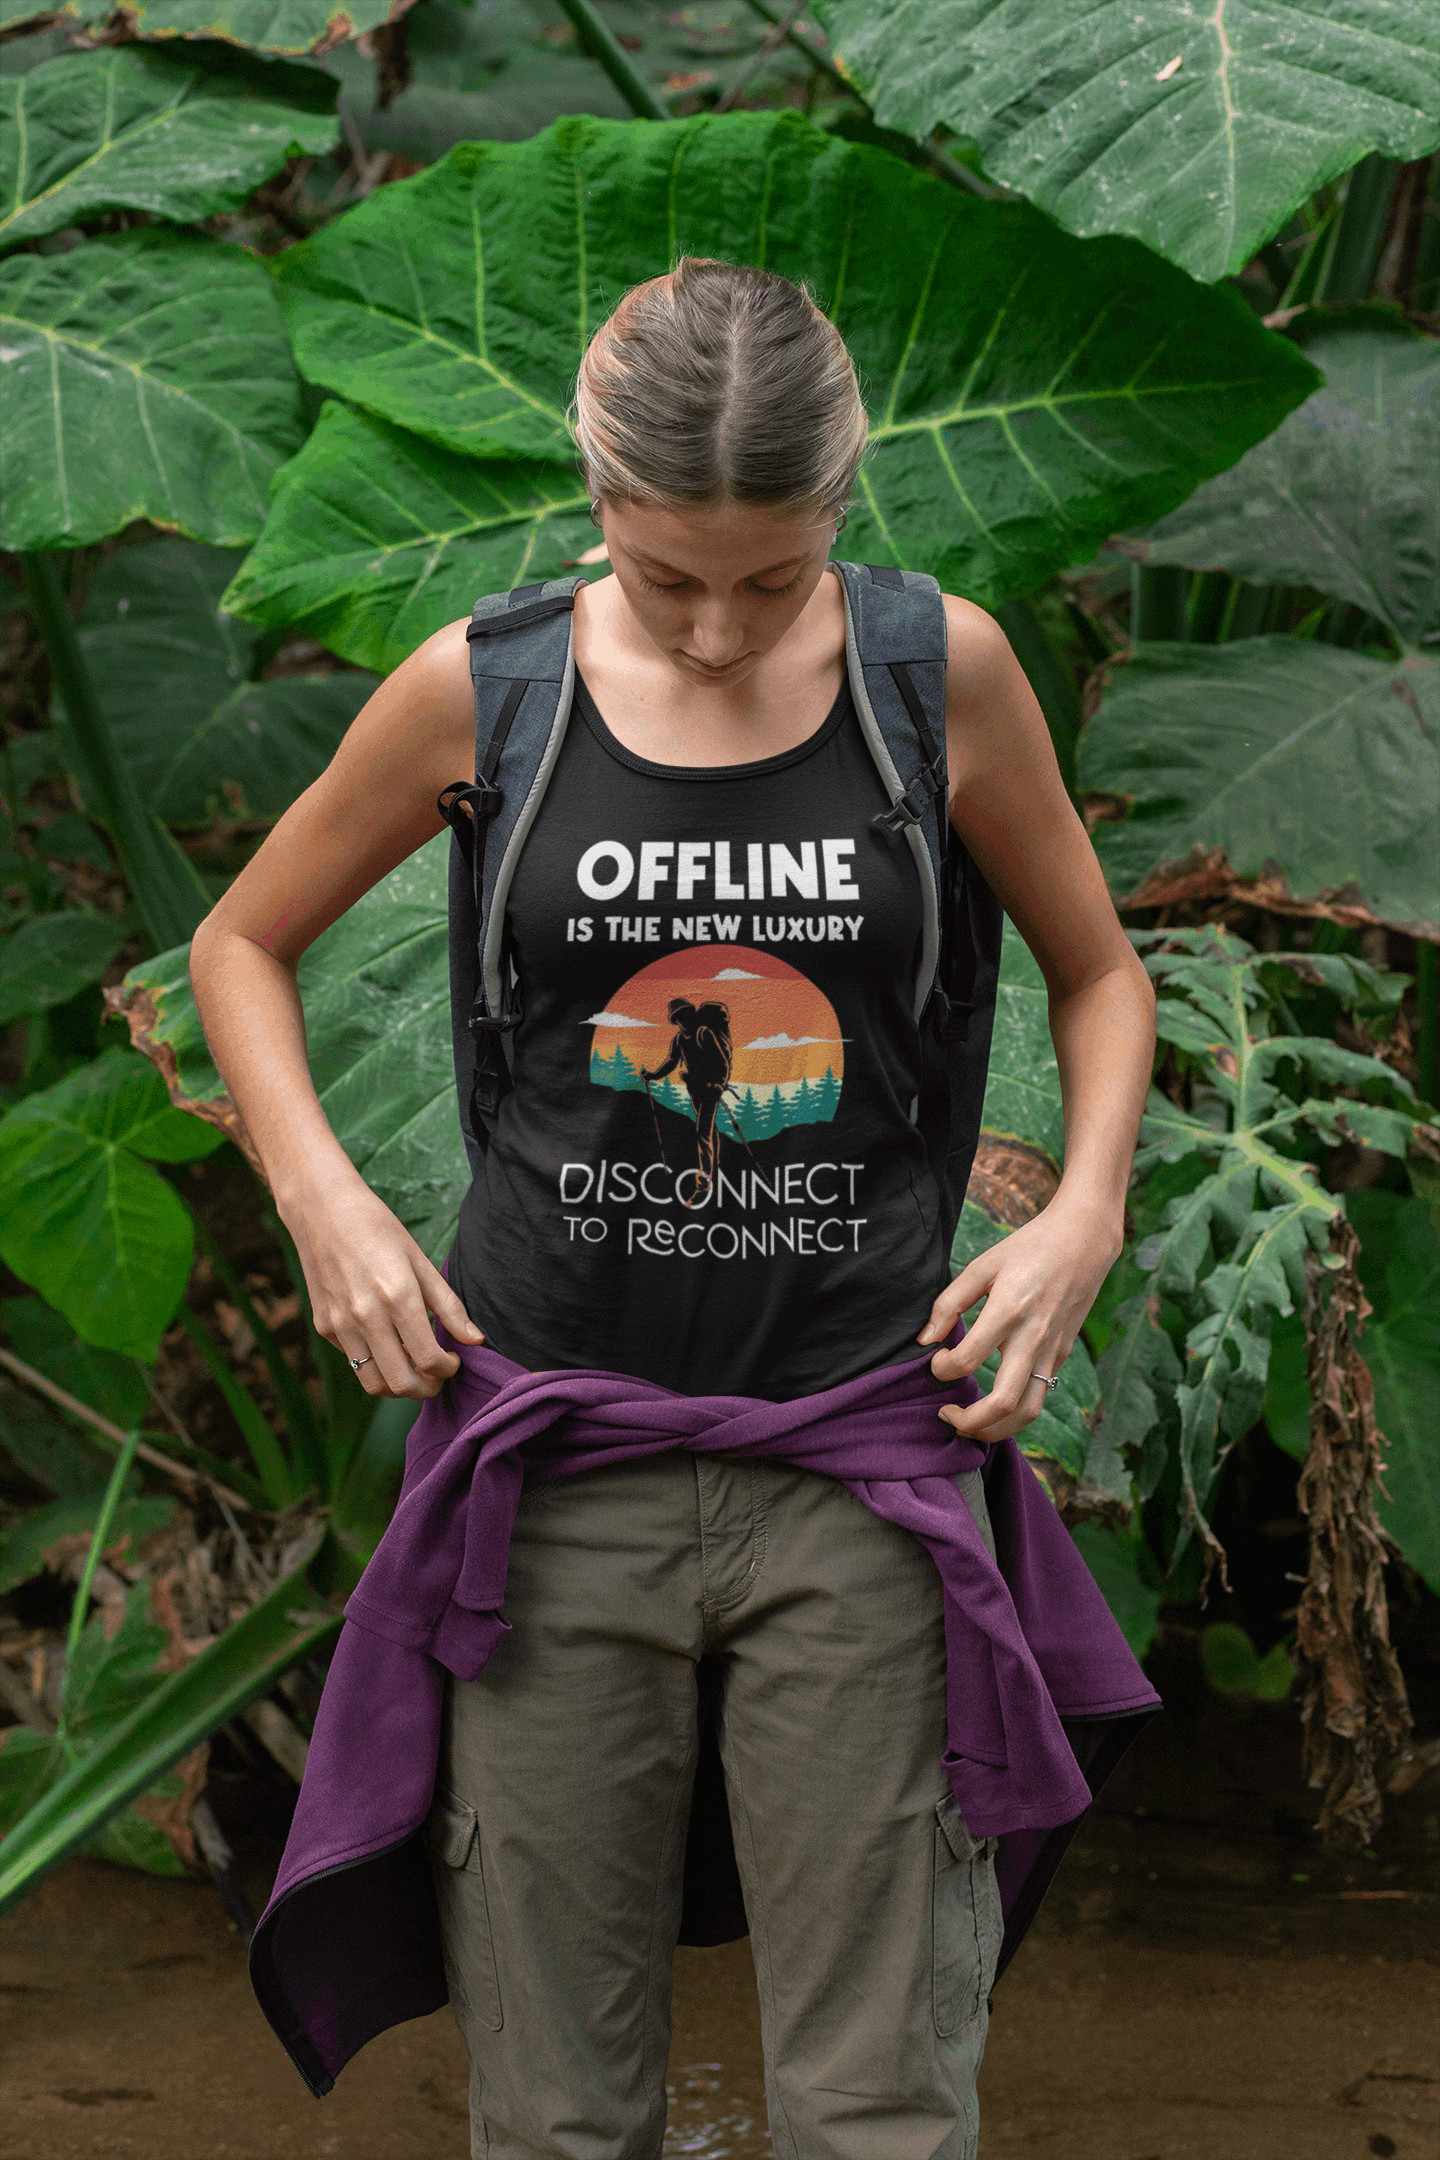 Offline is the new luxury, disconnect to reconnect...